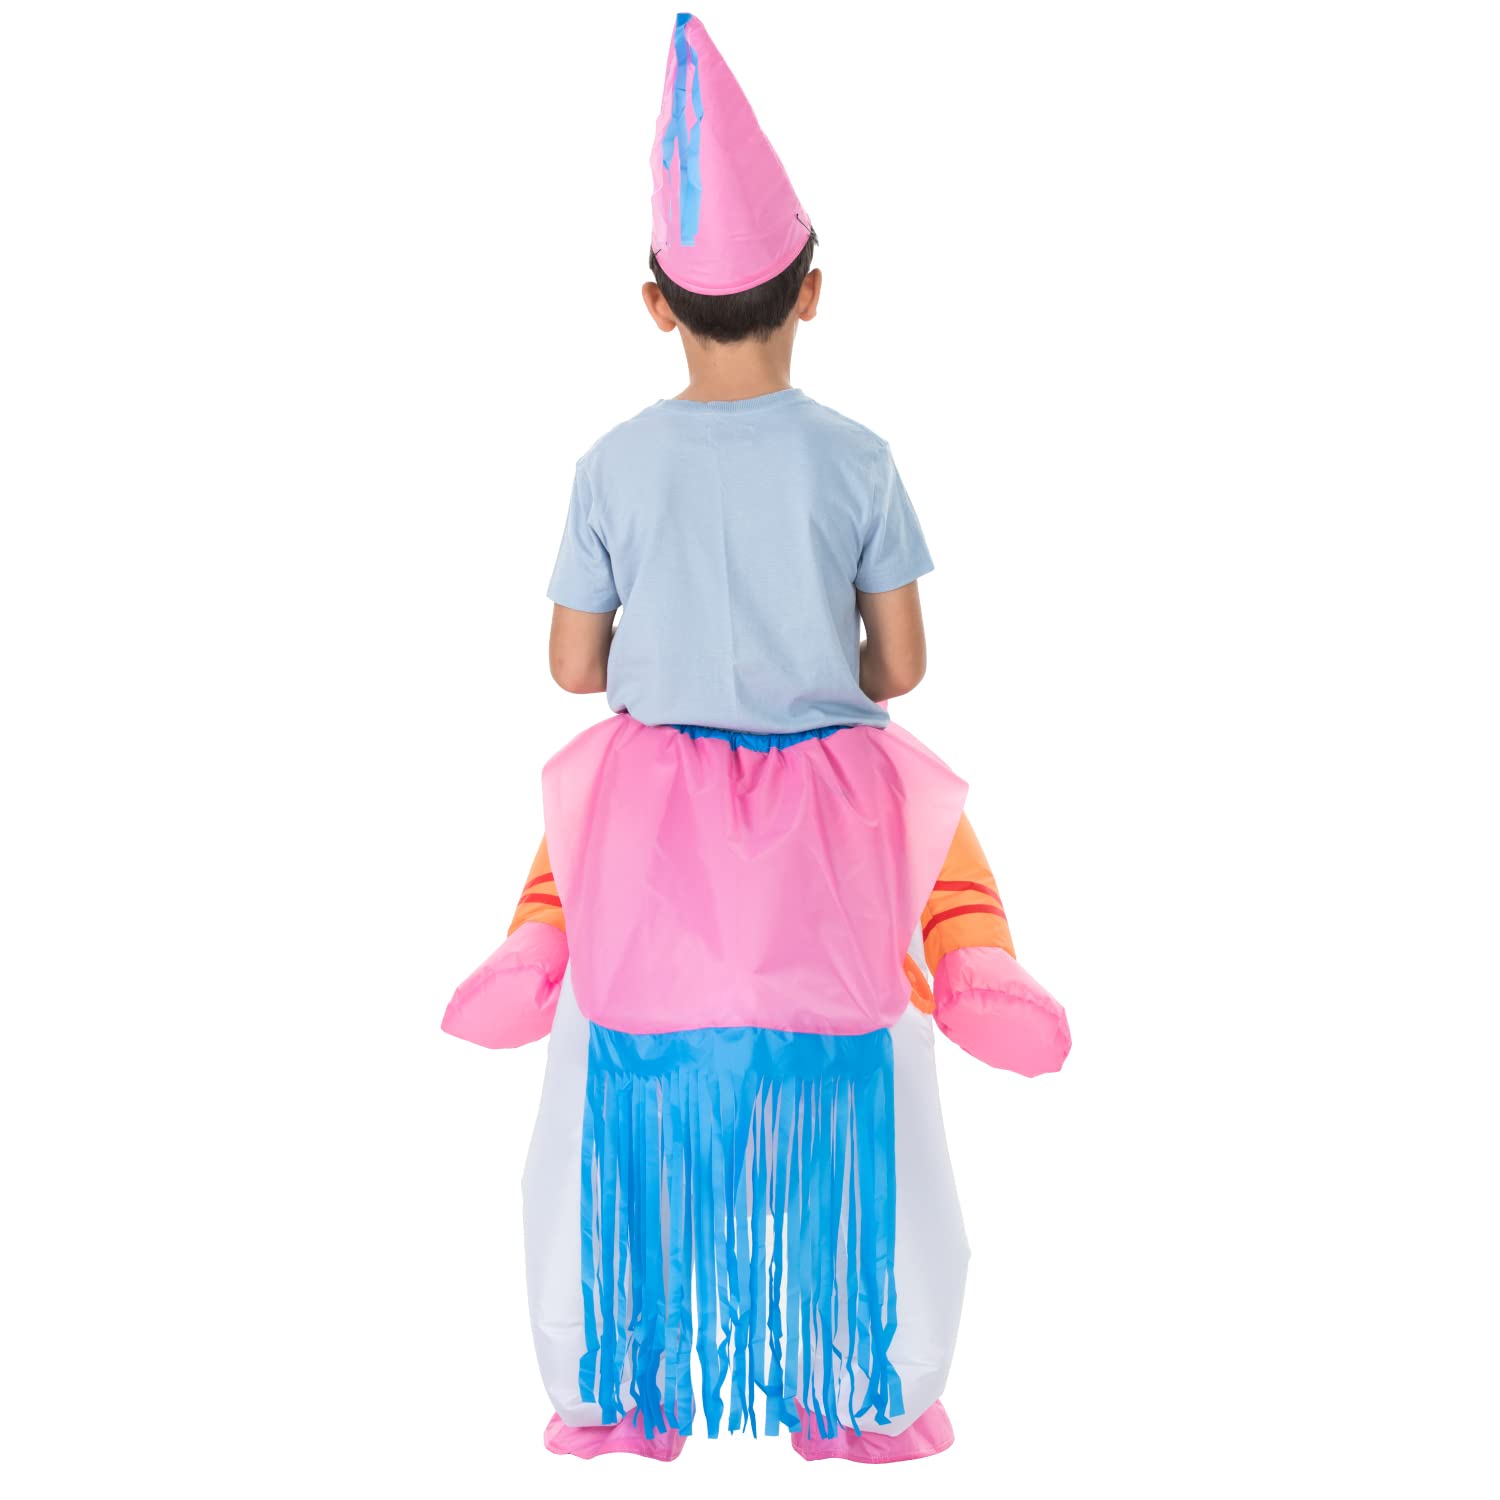 TOLOCO Inflatable Costume, Blow up Costume, Inflatable Unicorn Costume for Adult Kids